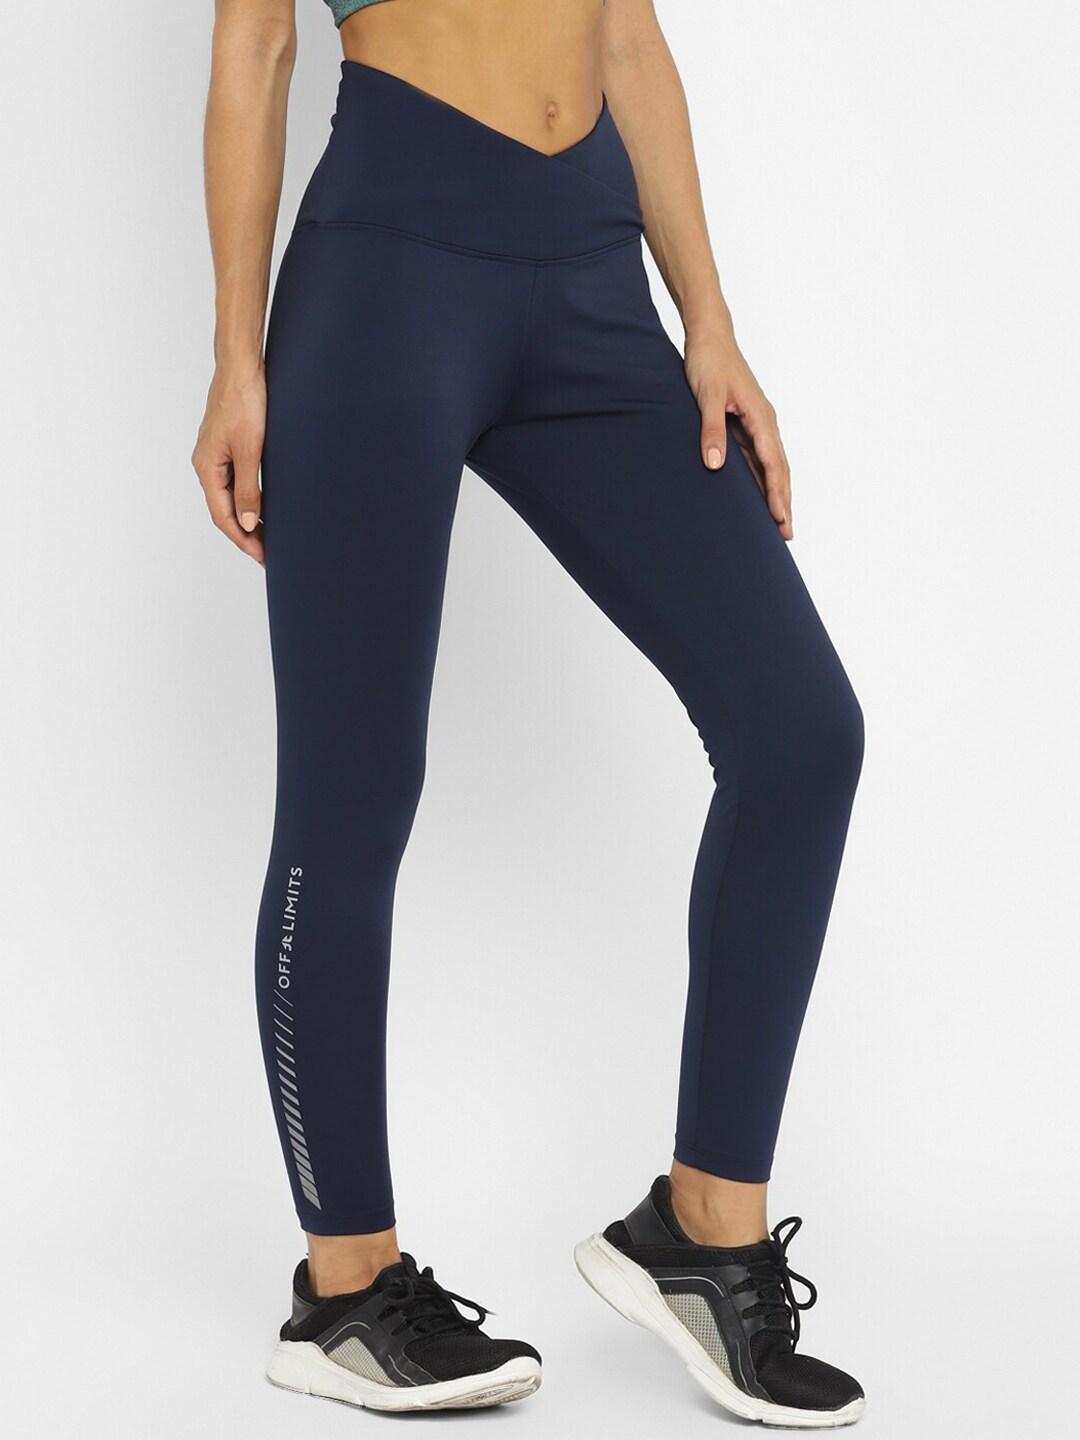 off limits women navy blue solid ankle length training tights